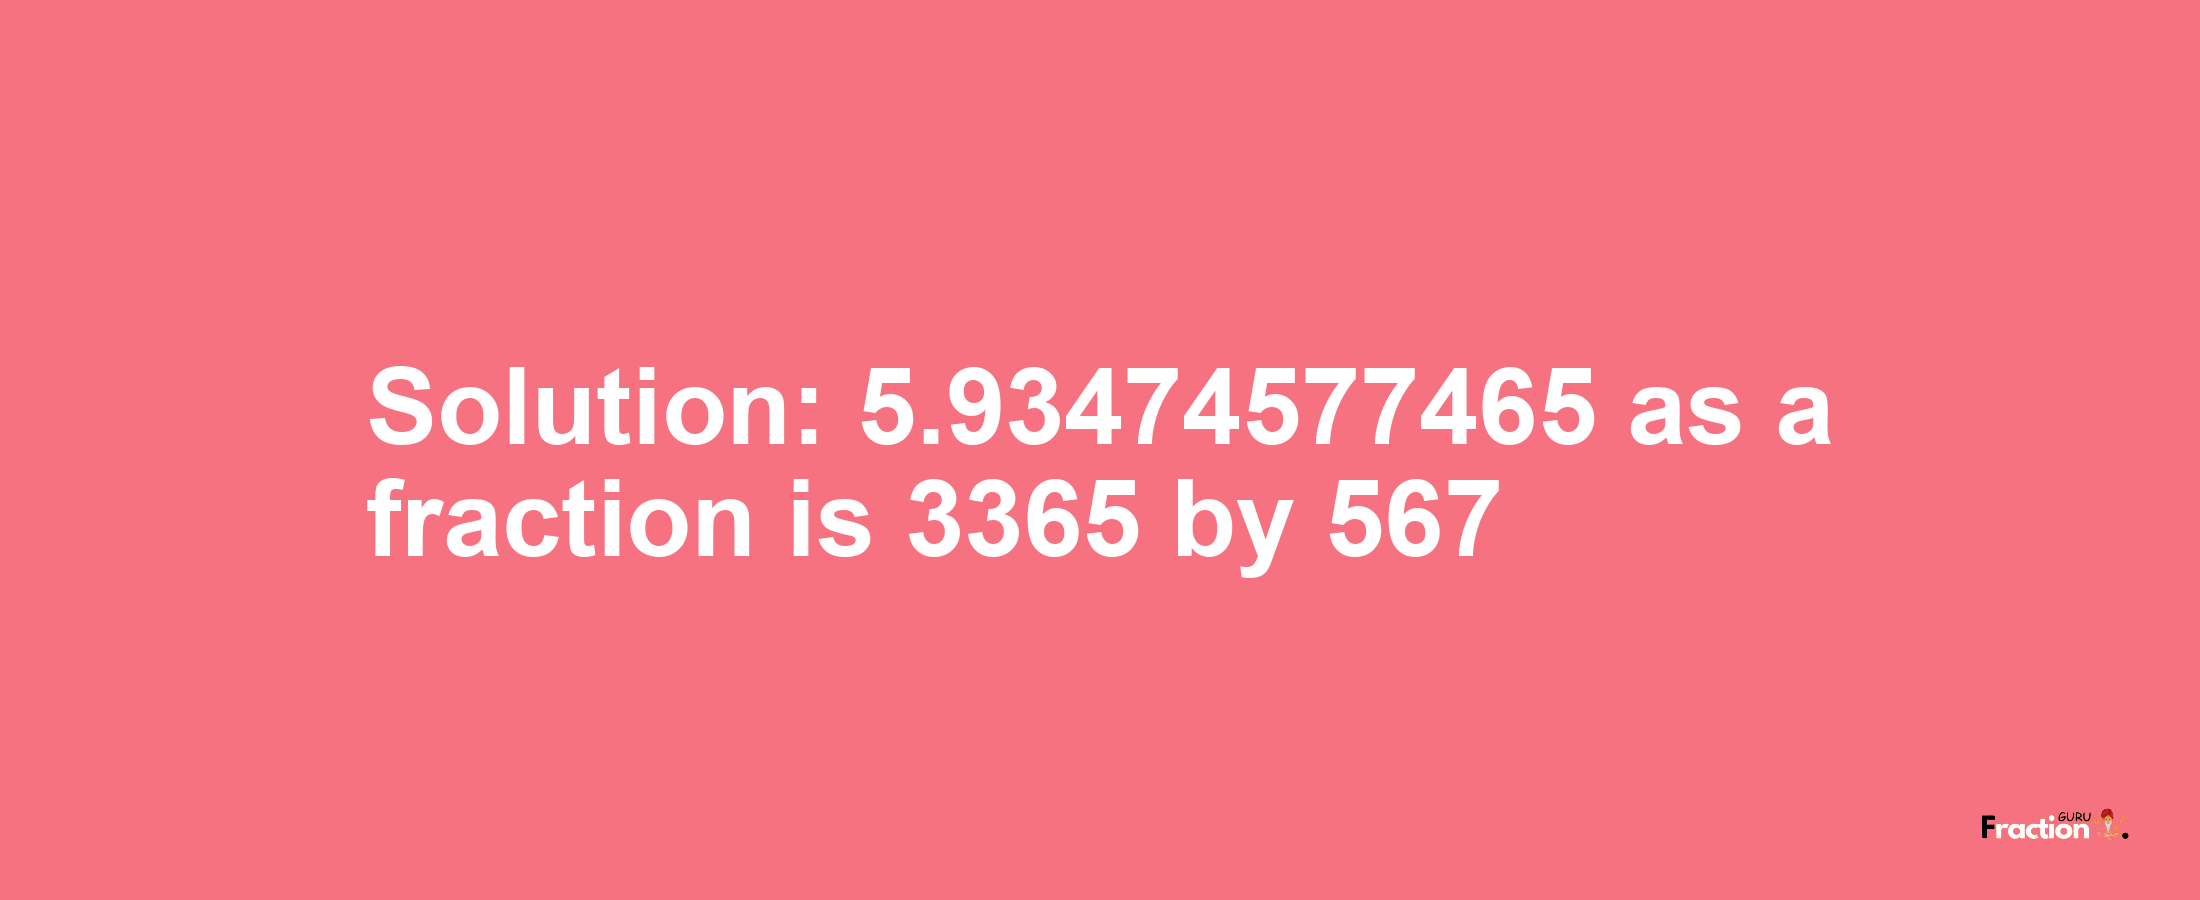 Solution:5.93474577465 as a fraction is 3365/567